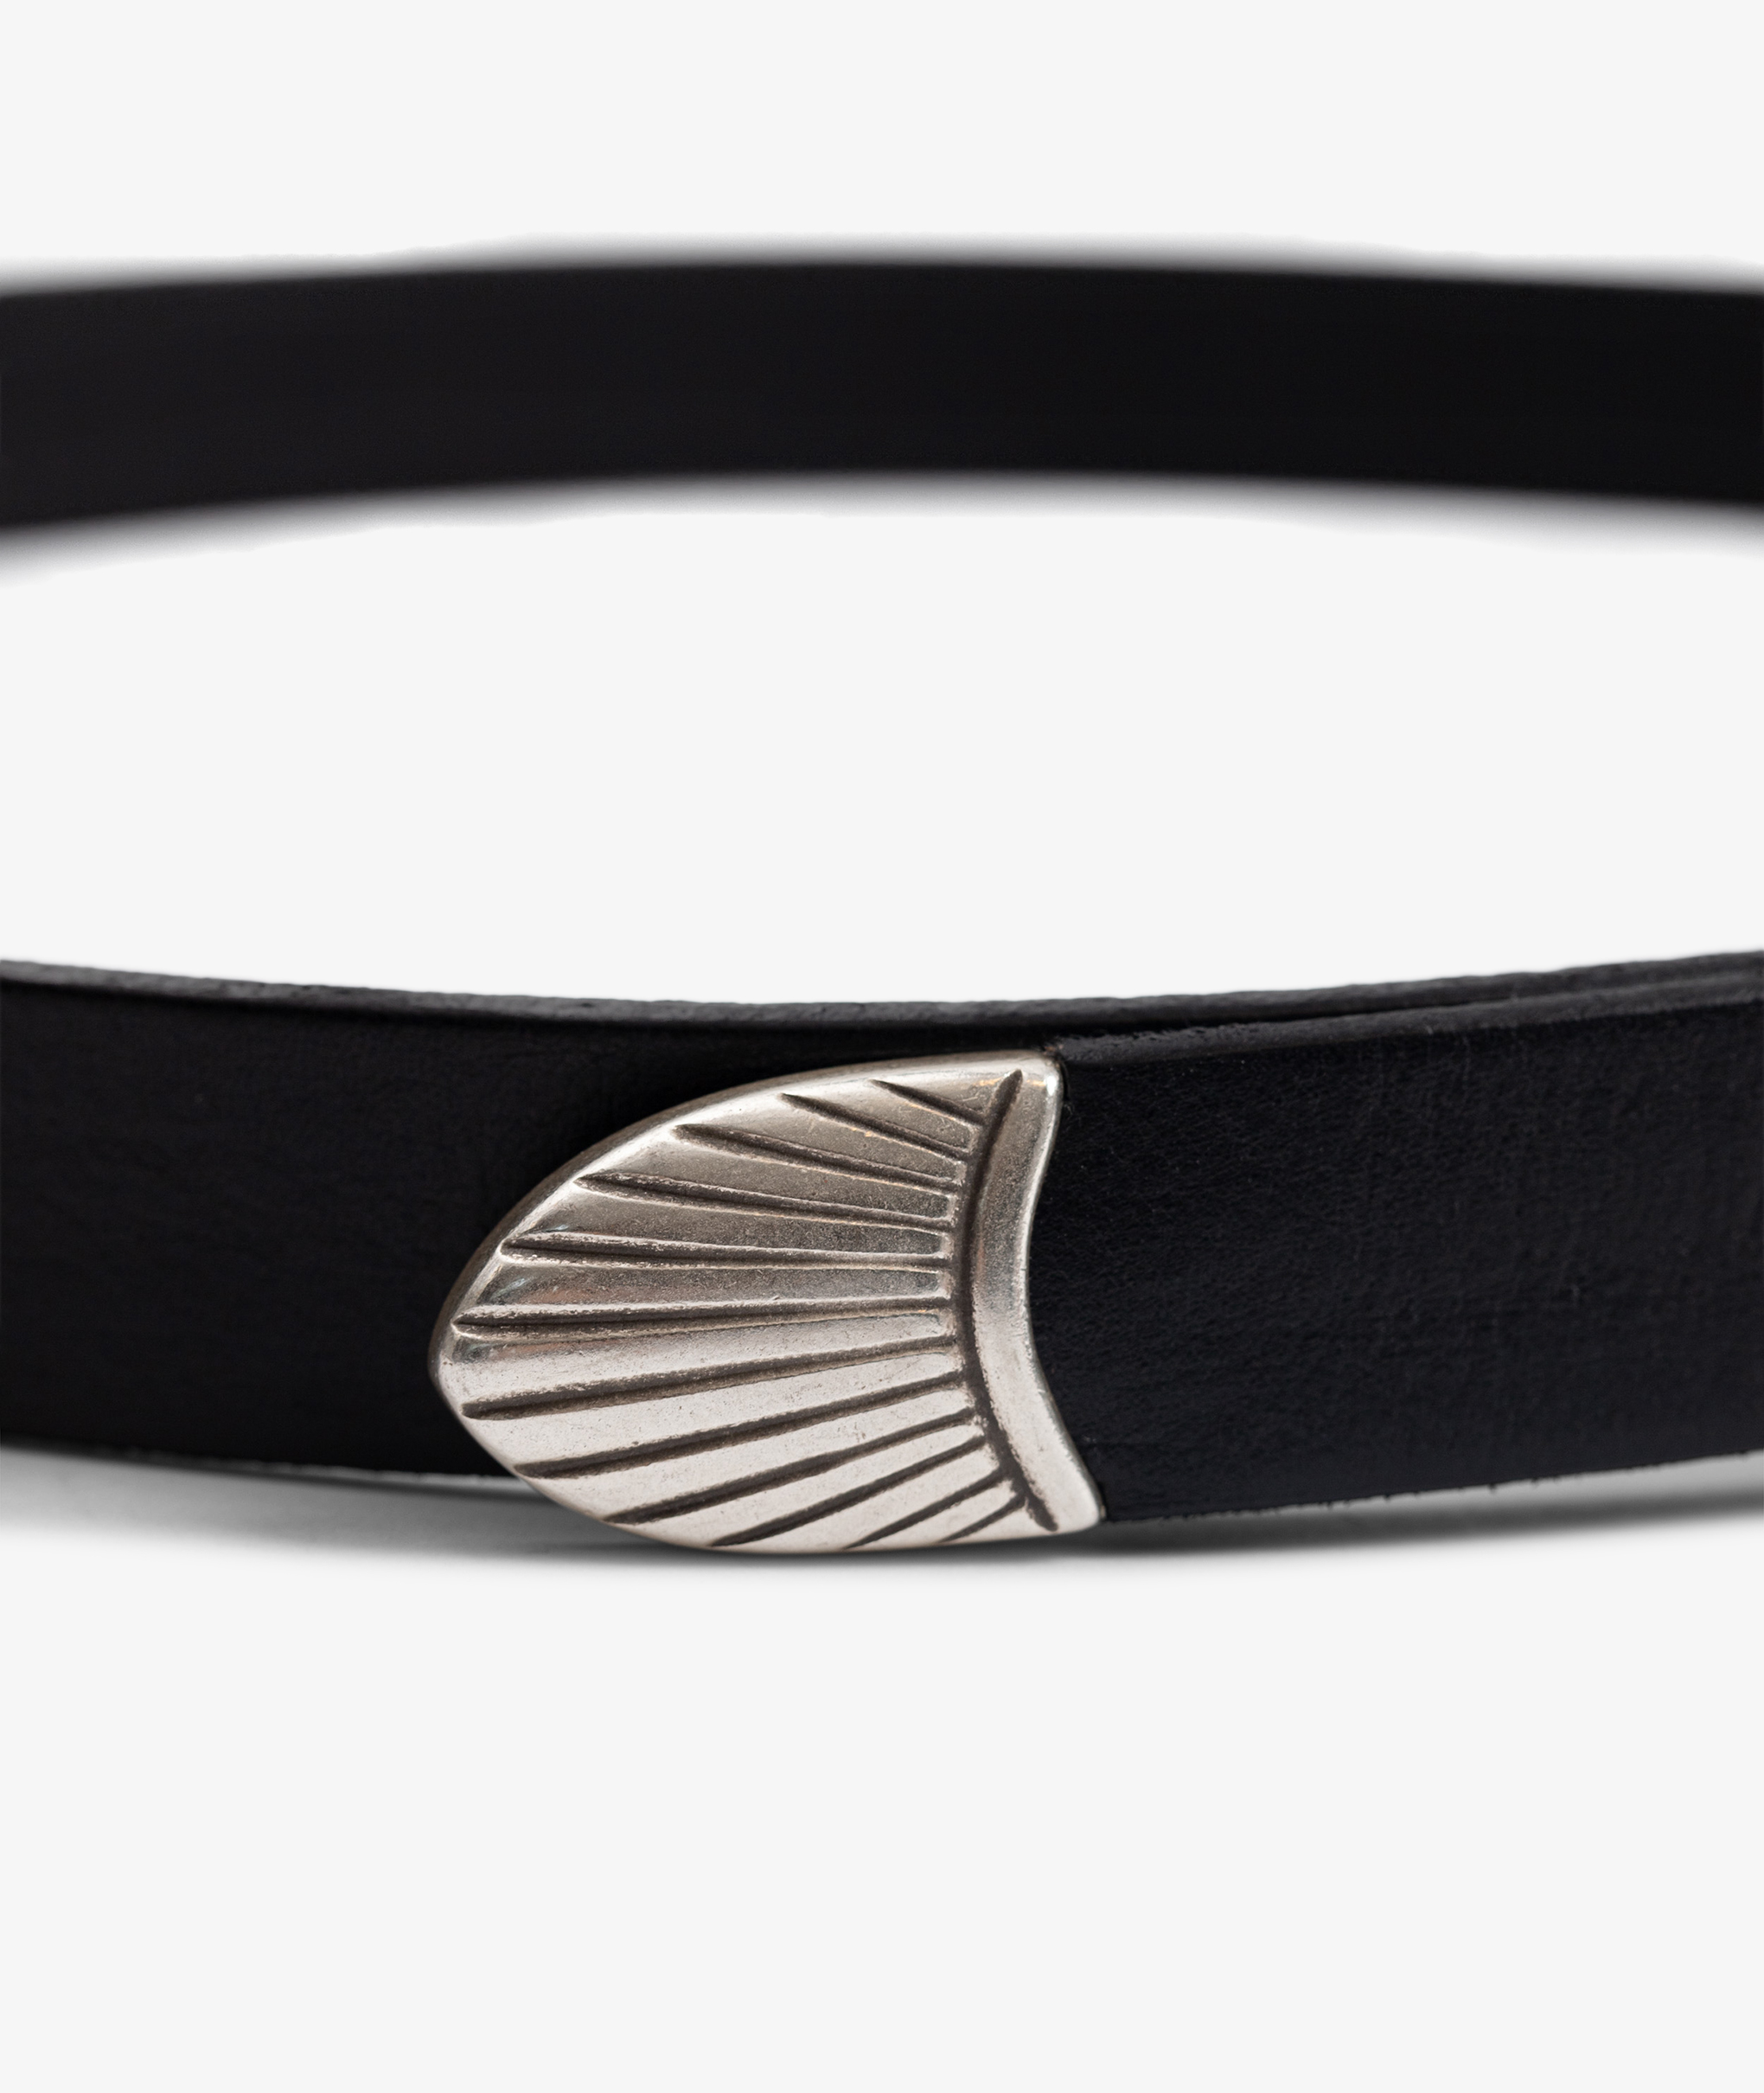 Norse Store  Shipping Worldwide - Anderson's Buckled Leather Belt